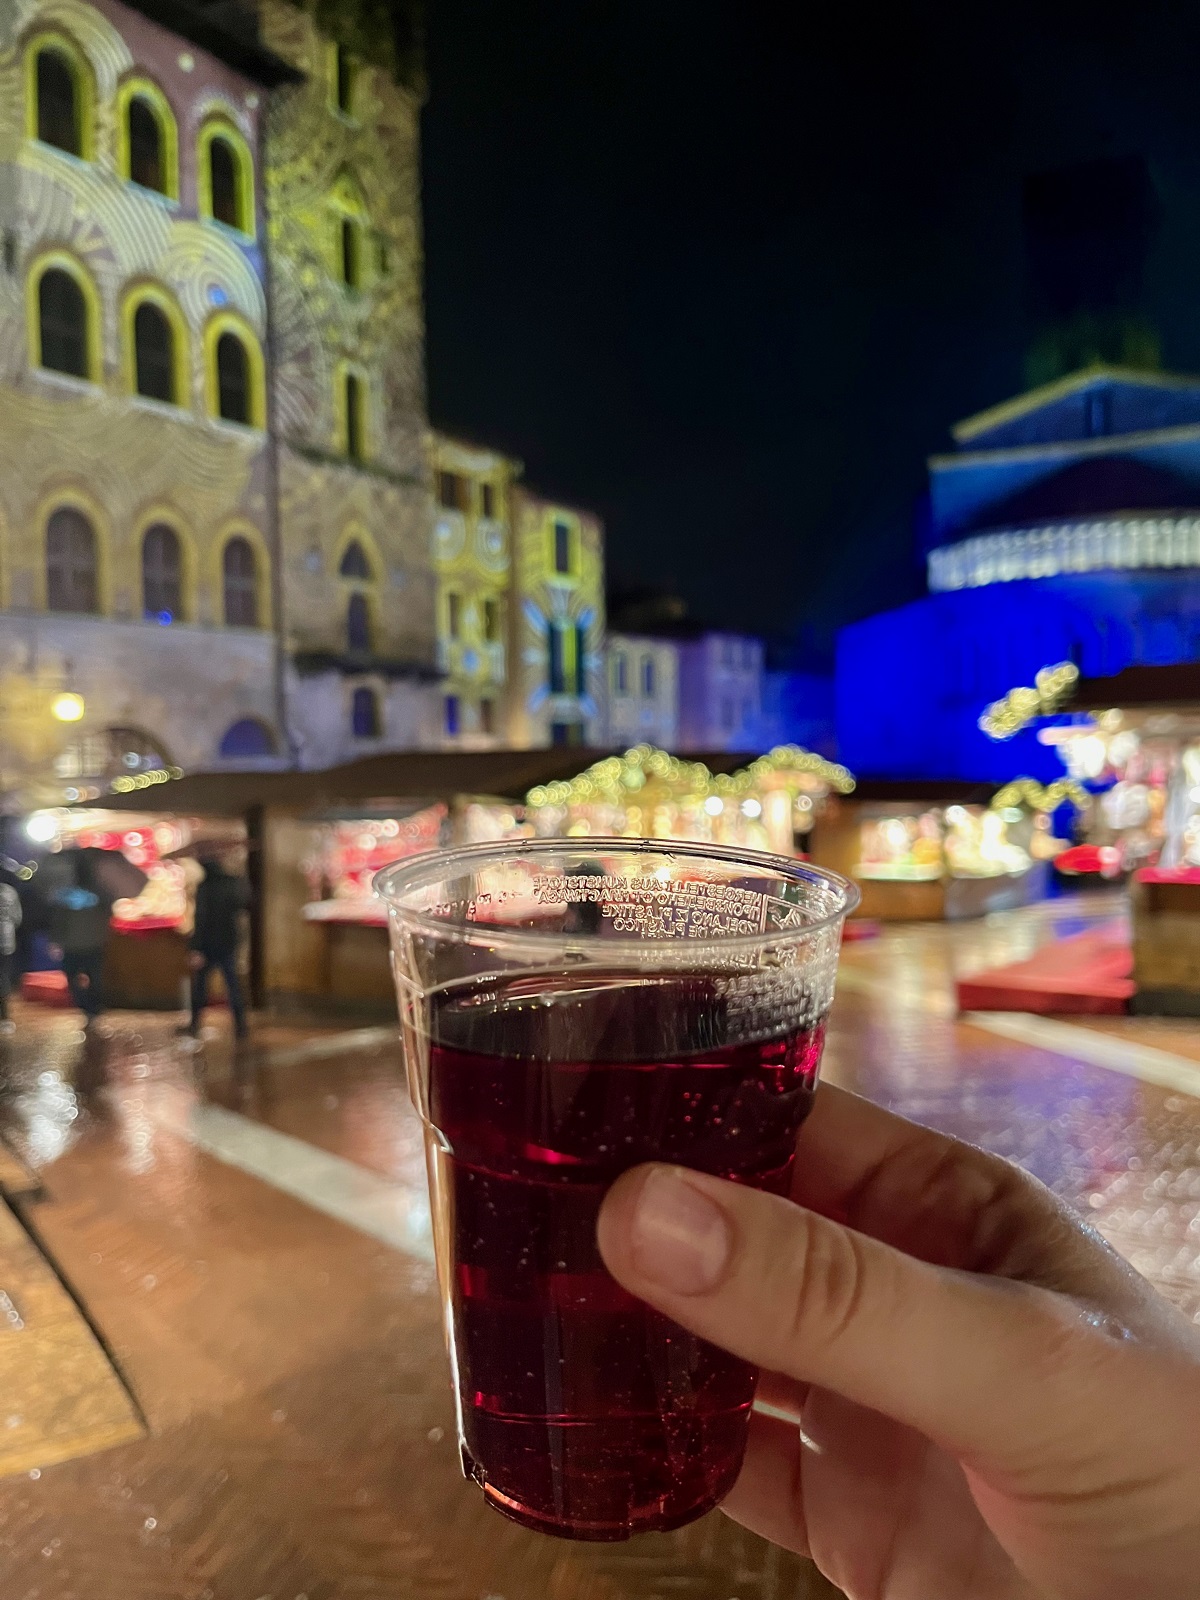 Arezzo Christmas Market in the rain with a glass of wine and lights